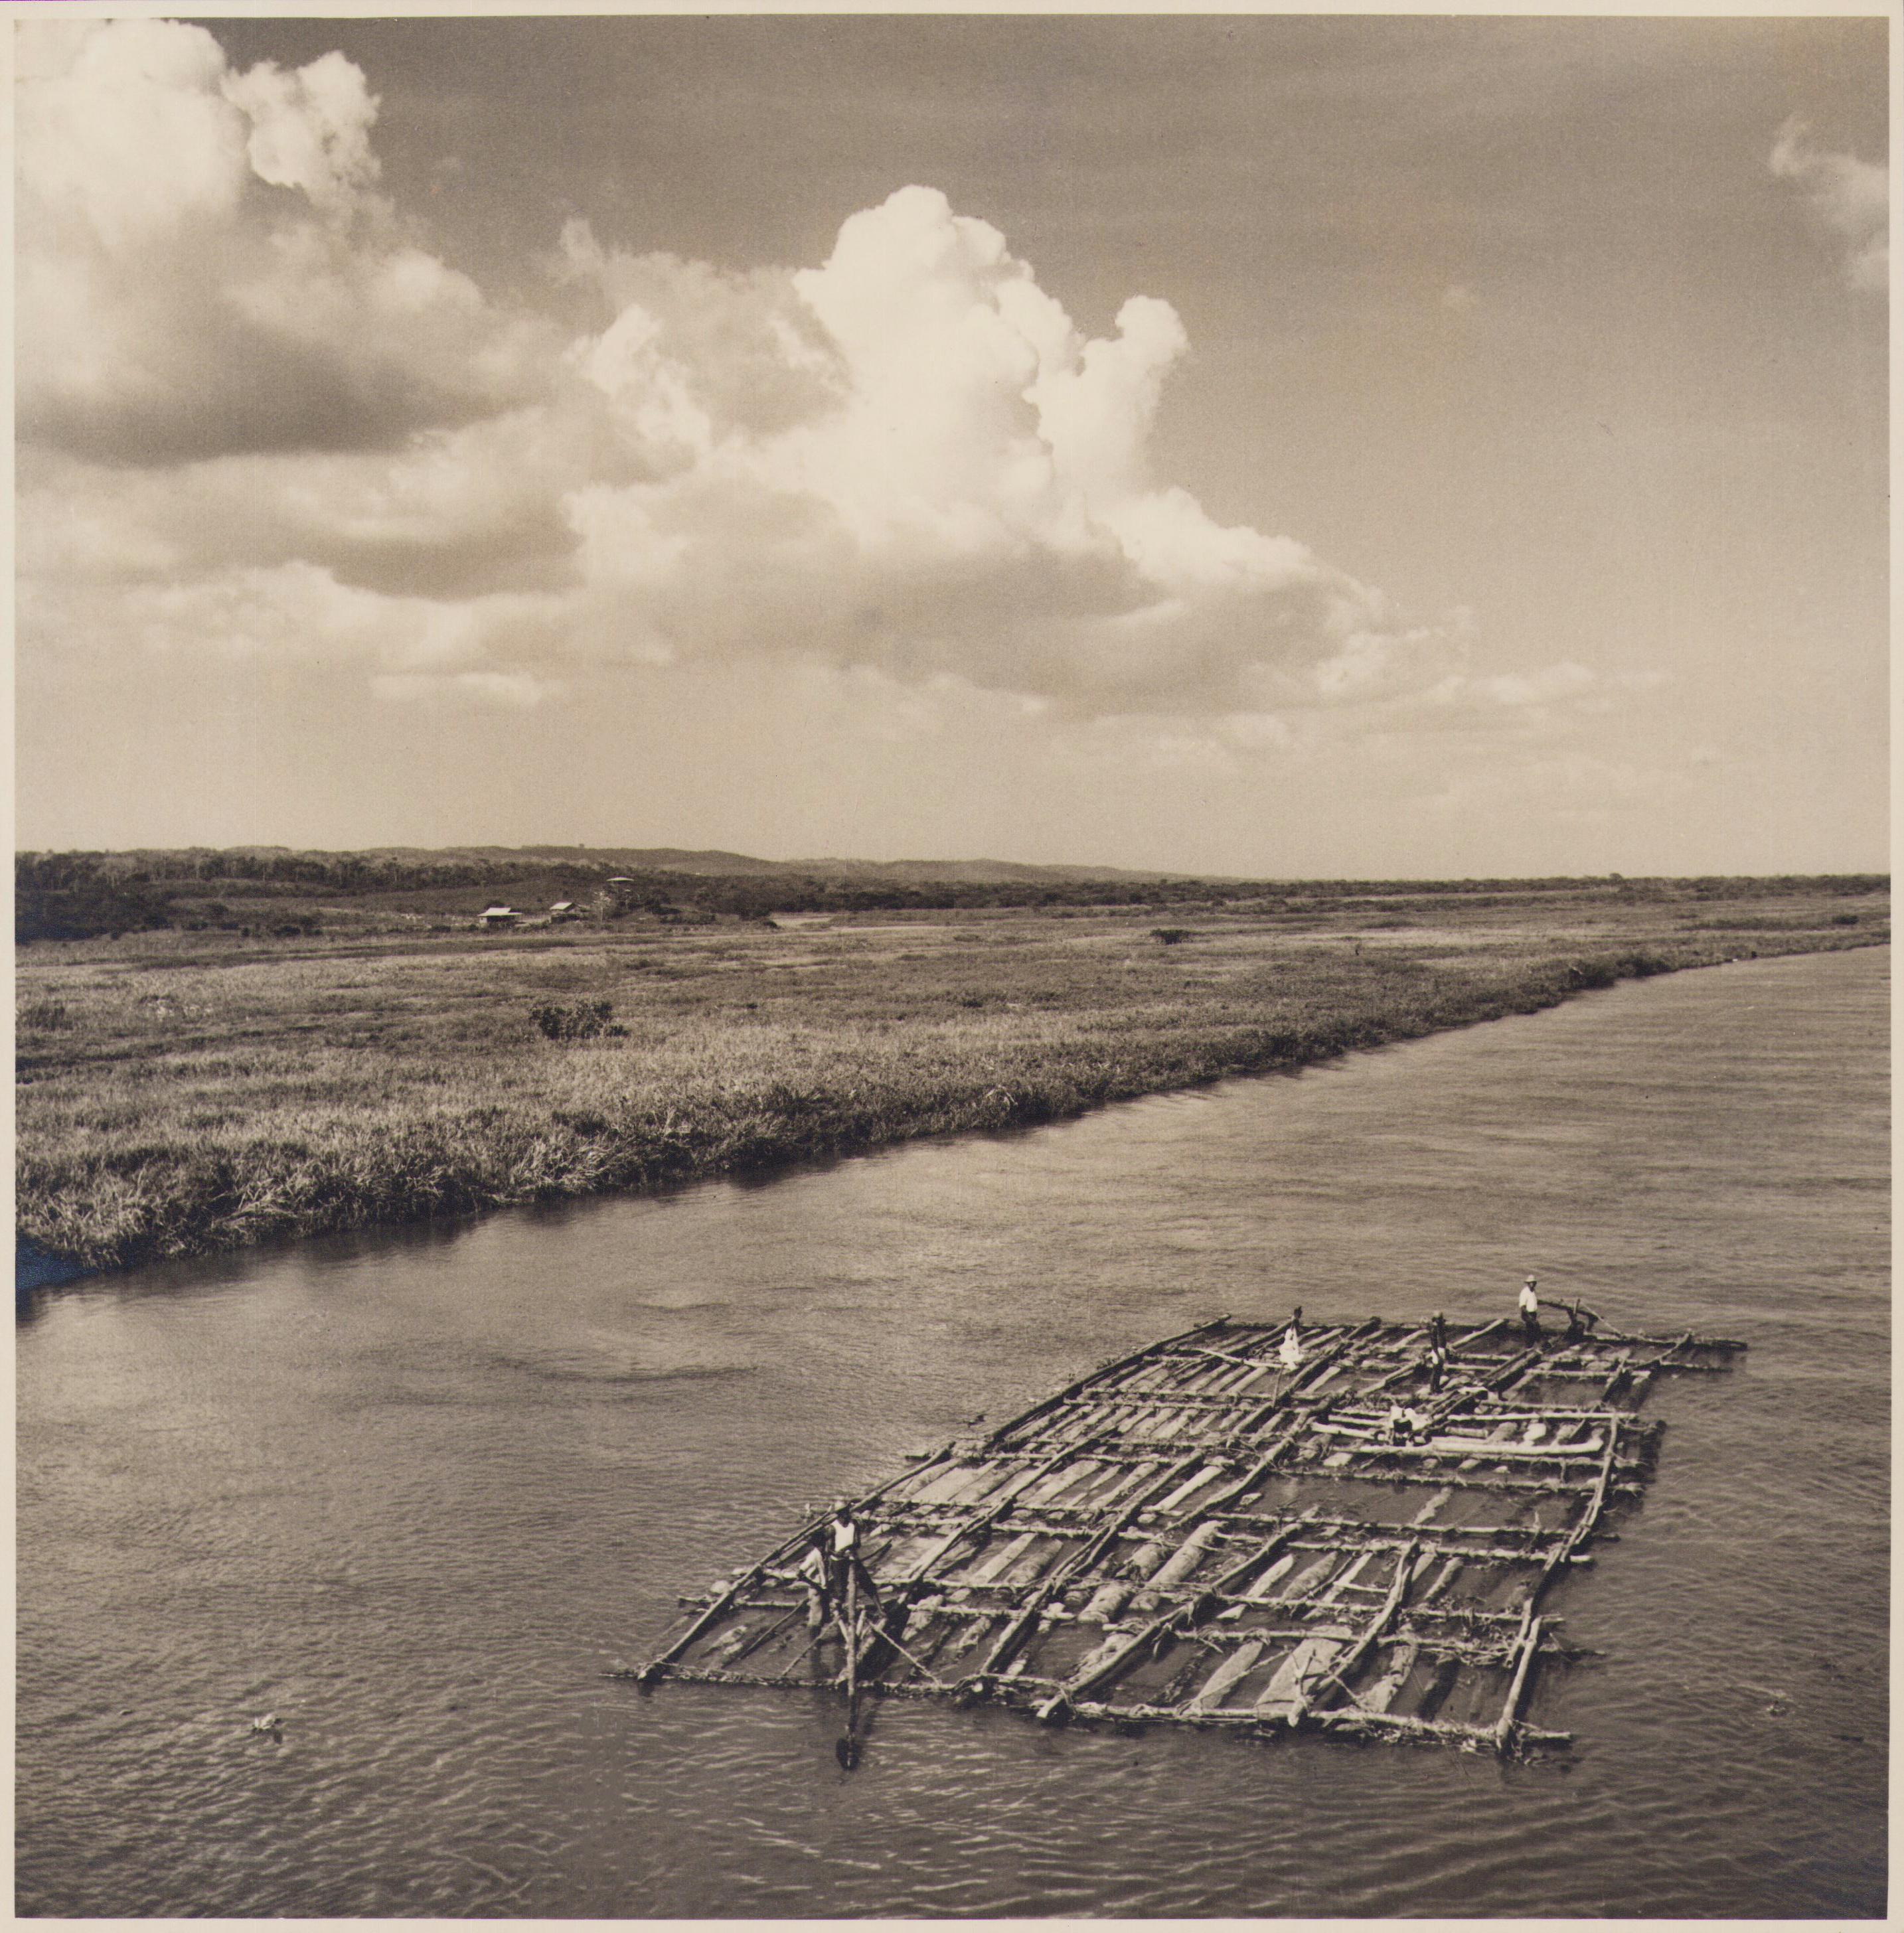 Hanna Seidel Portrait Photograph - Colombia, River, Canal, Black and White Photography, 1960s, 24, 6 x 24, 4 cm